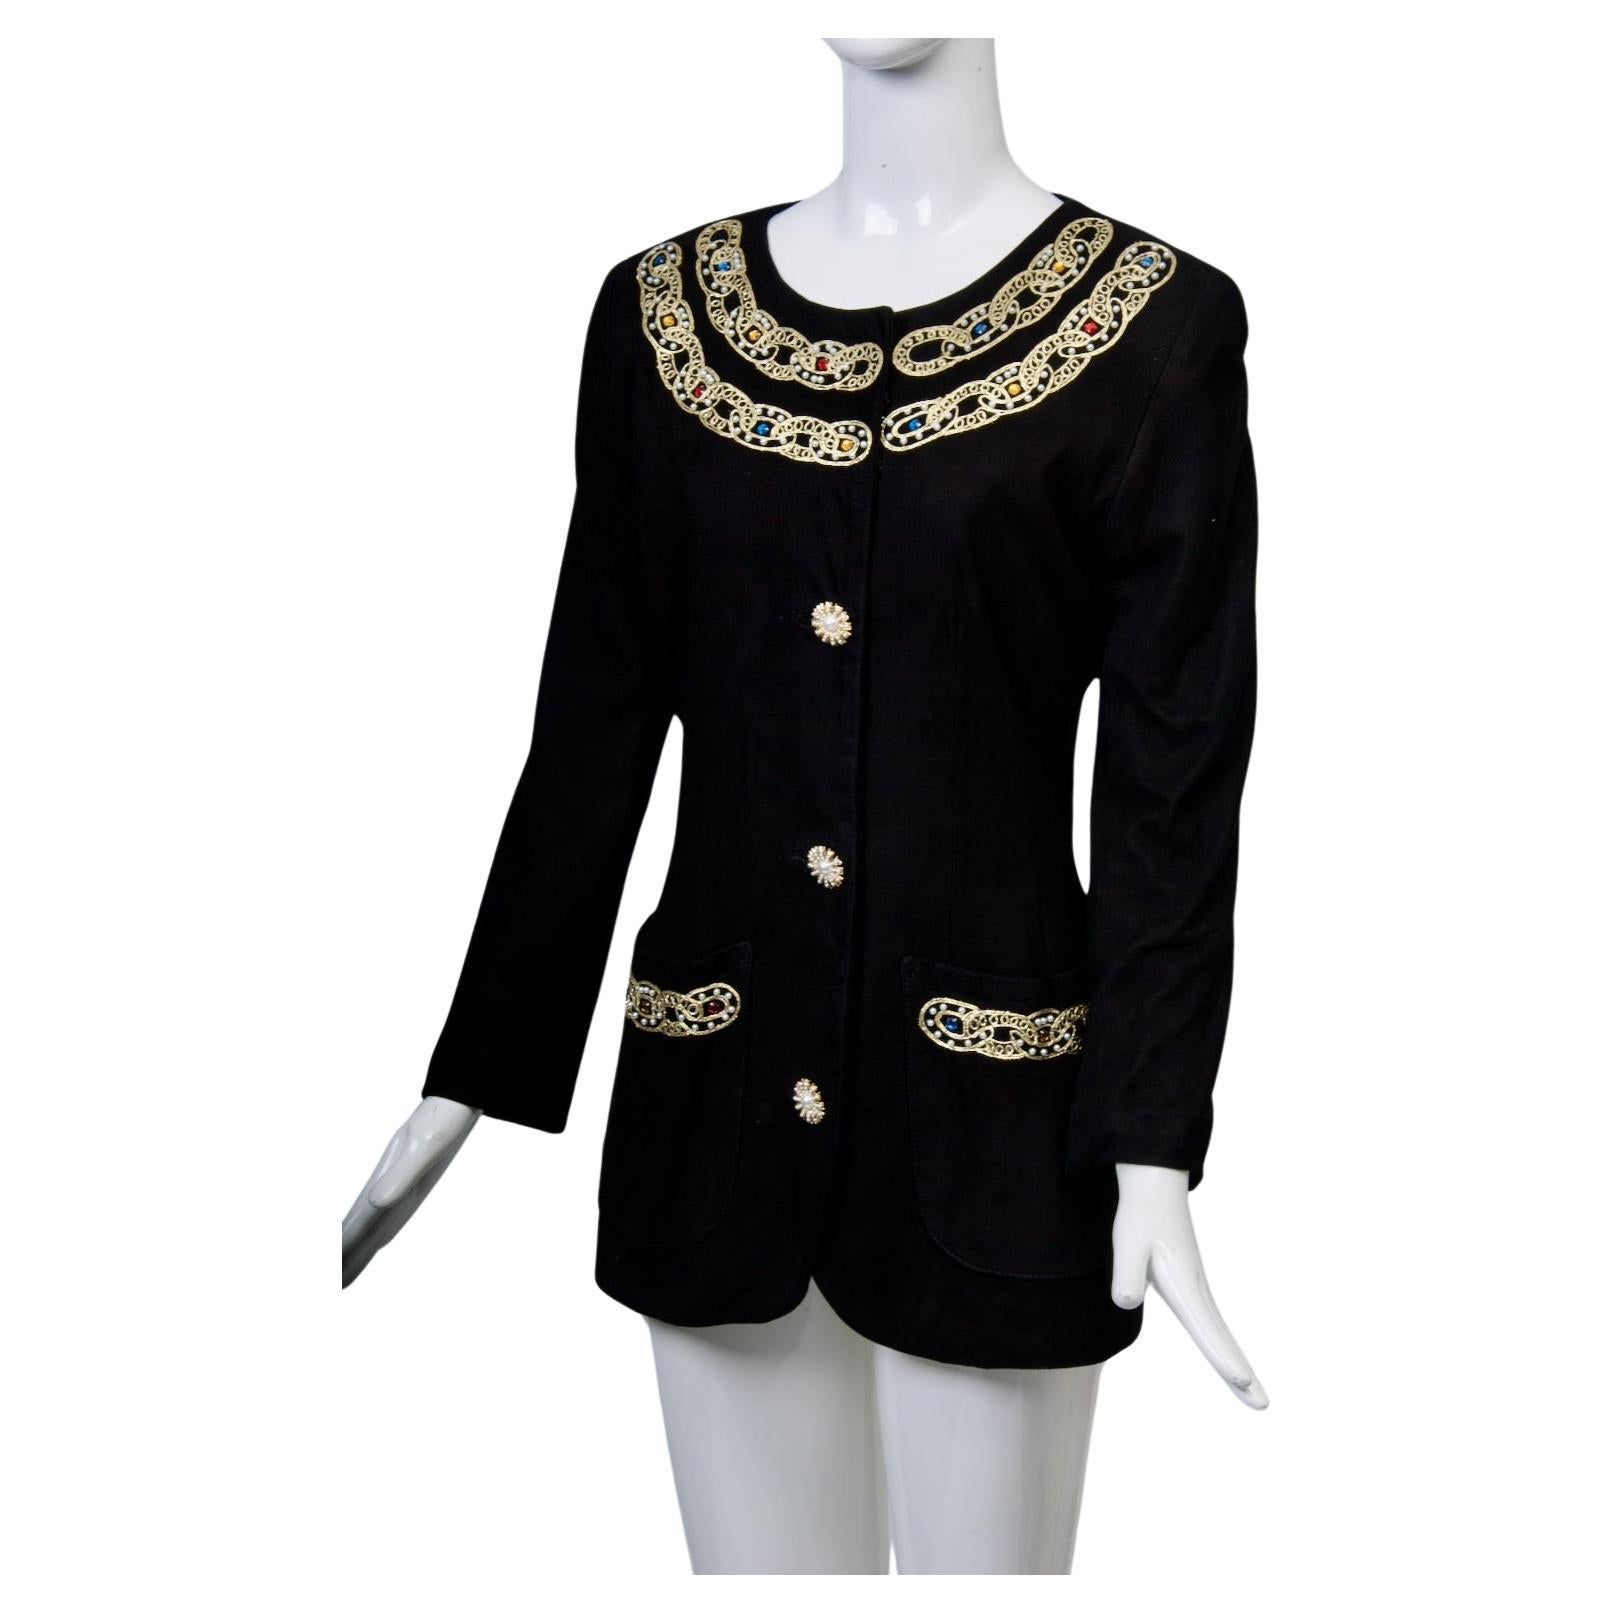 Vakko Black Suede Jacket with Gold and Stone Trim